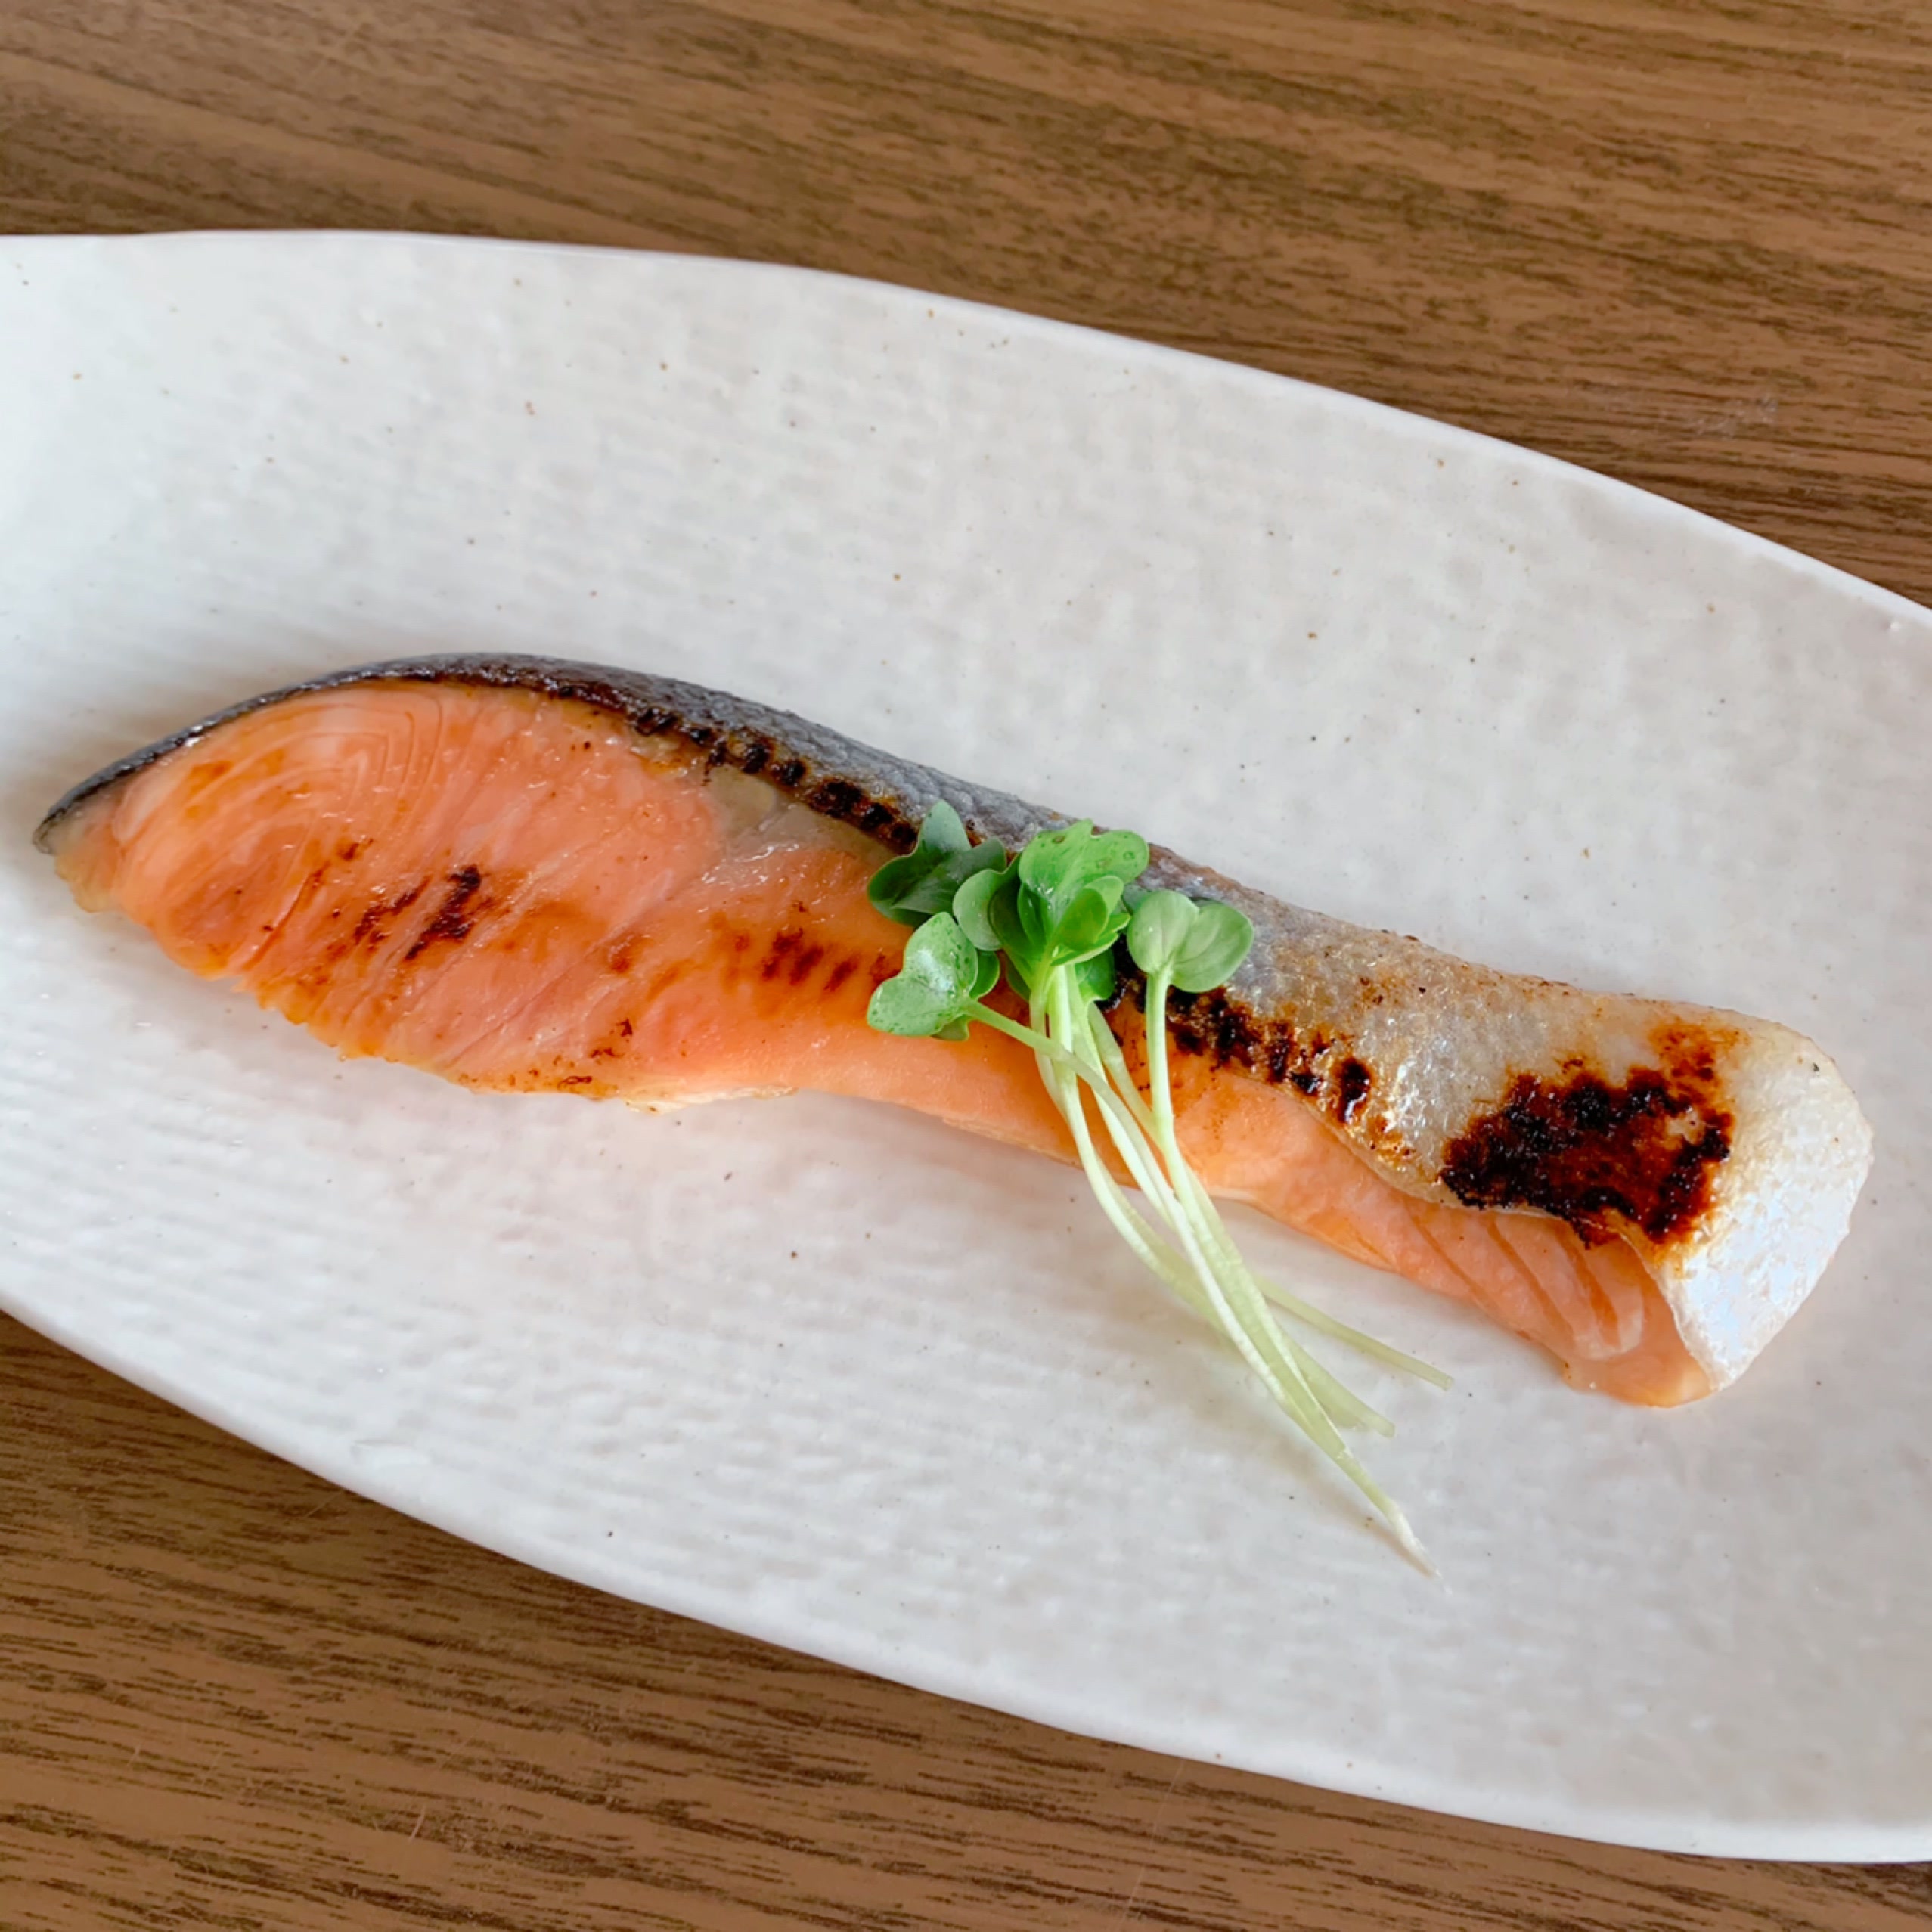 A dish of salmon marinated in shio-koji and grilled in a pan.